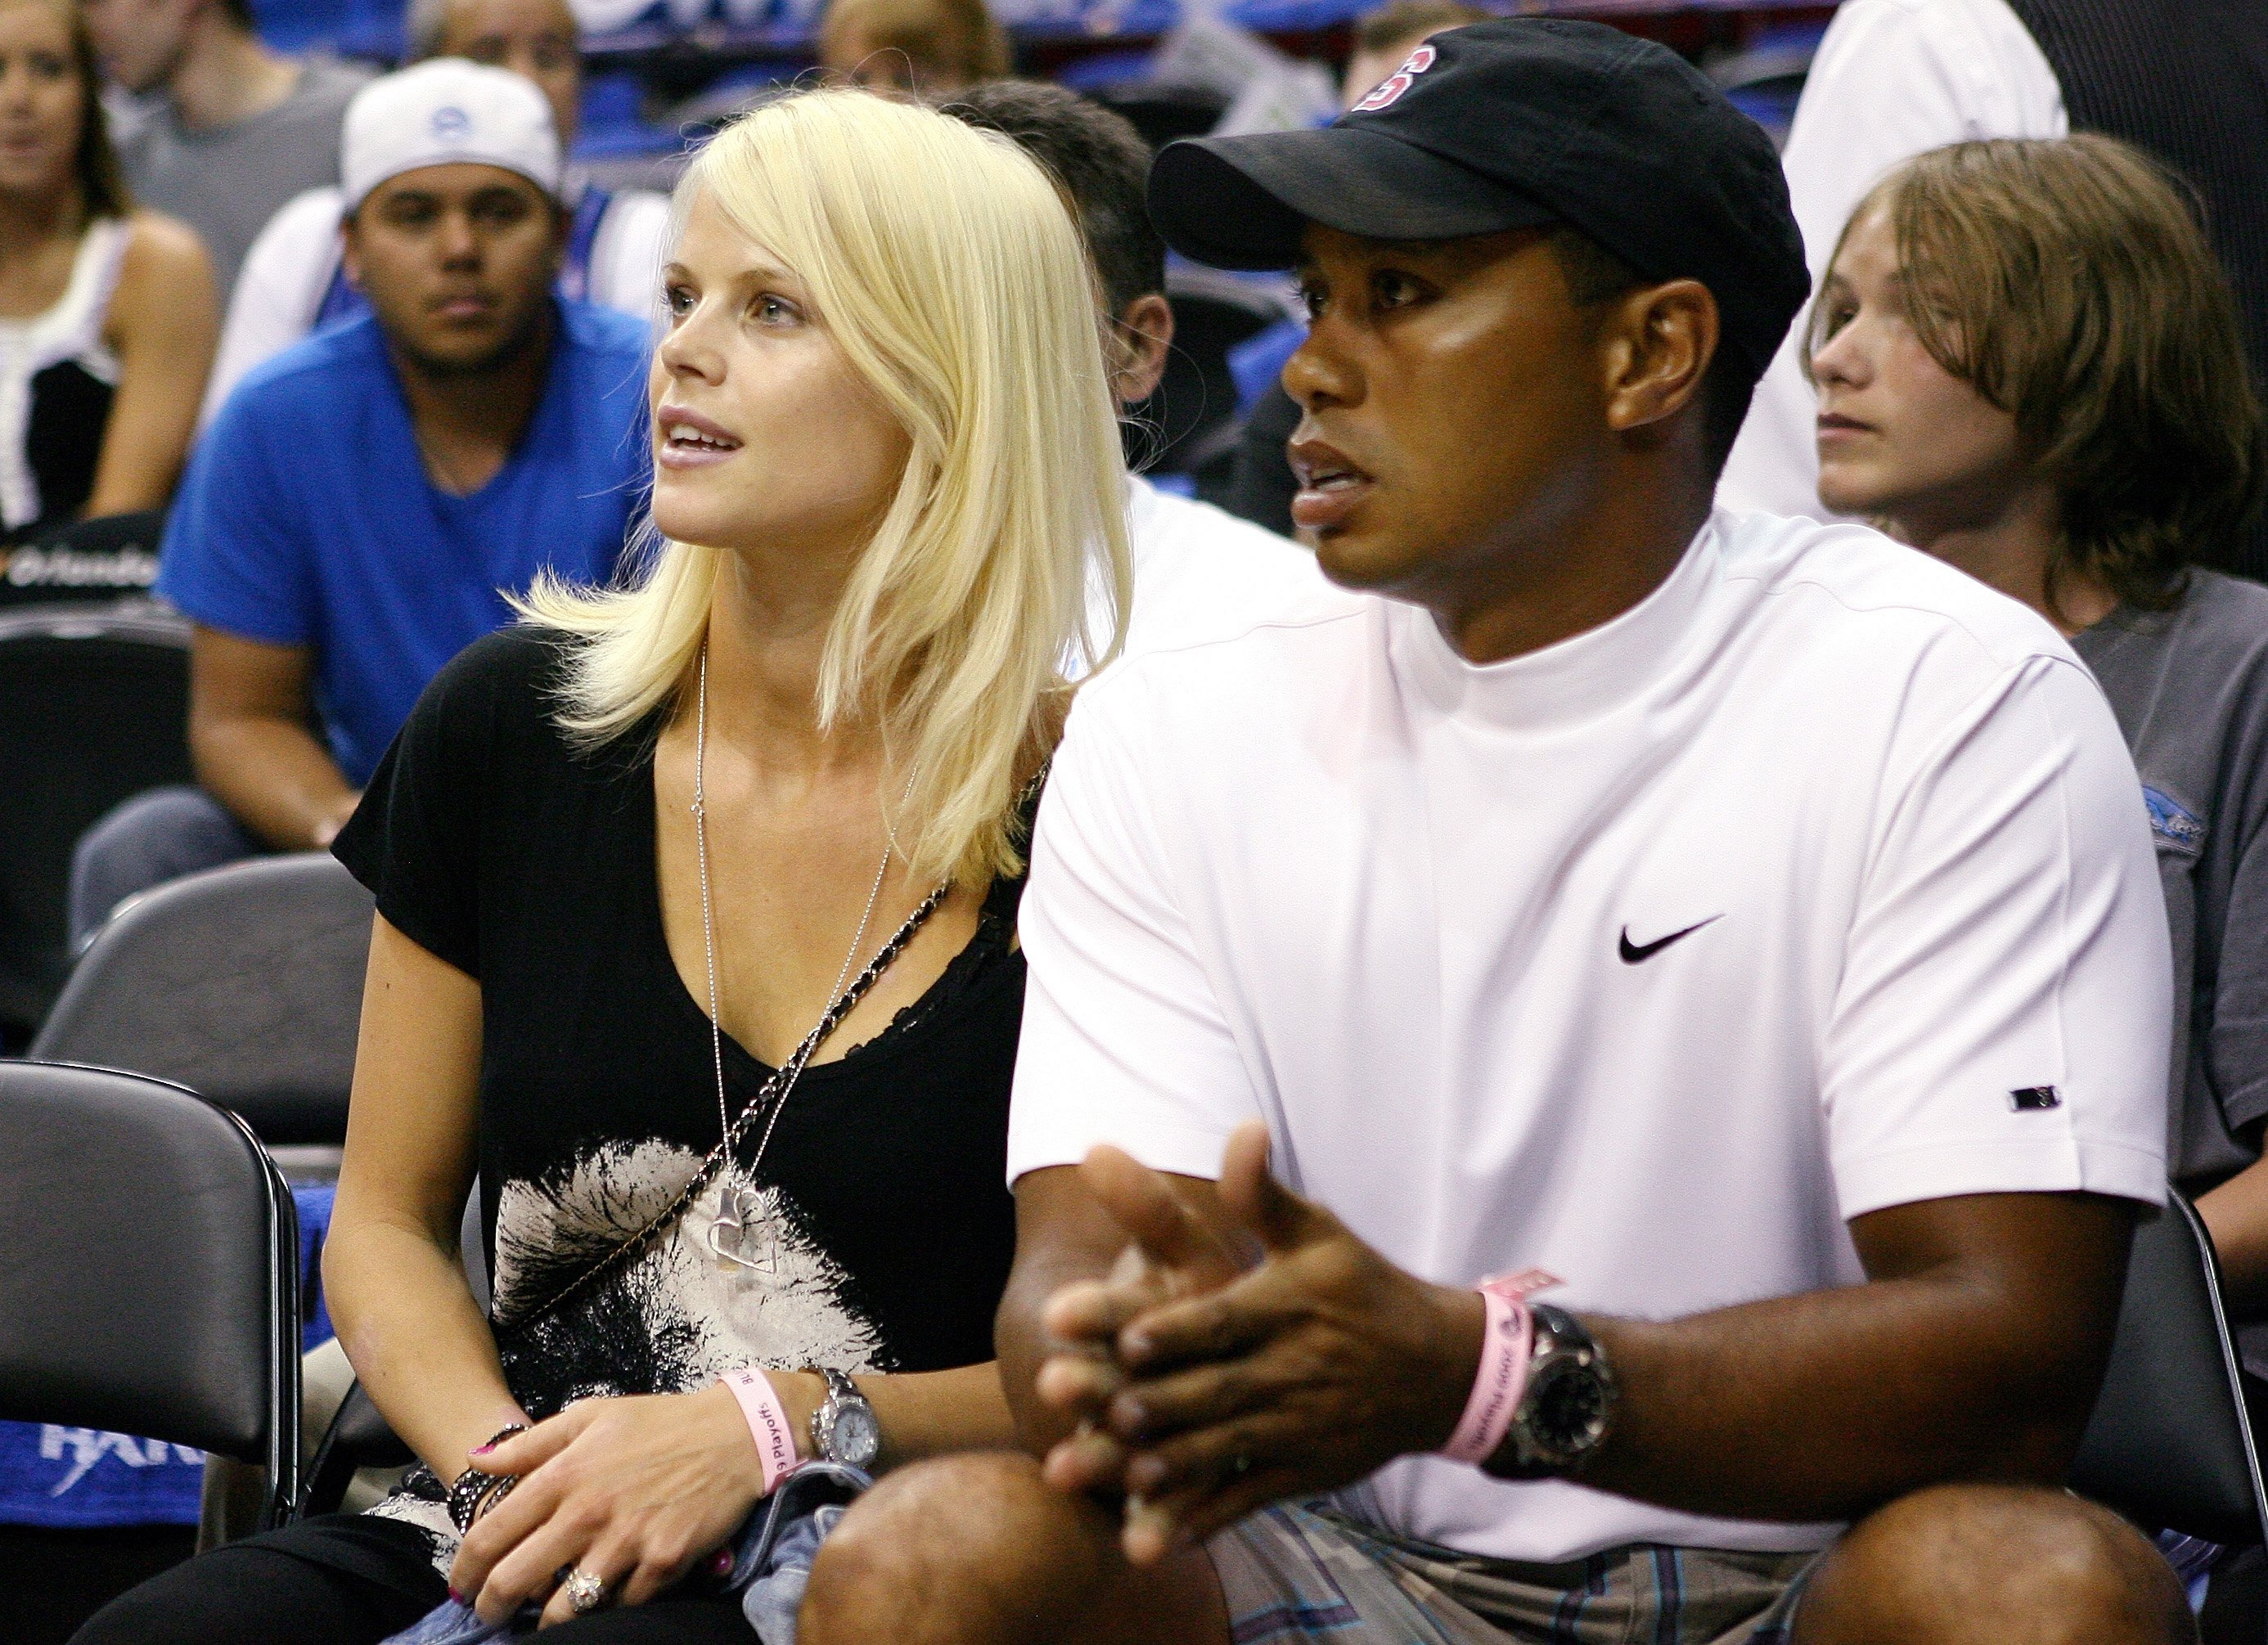 Tiger Woods with his wife Elin Nordegren during Game Four of the 2009 NBA Finals at Amway Arena on June 11, 2009 in Orlando, Florida. / Source: Getty Images